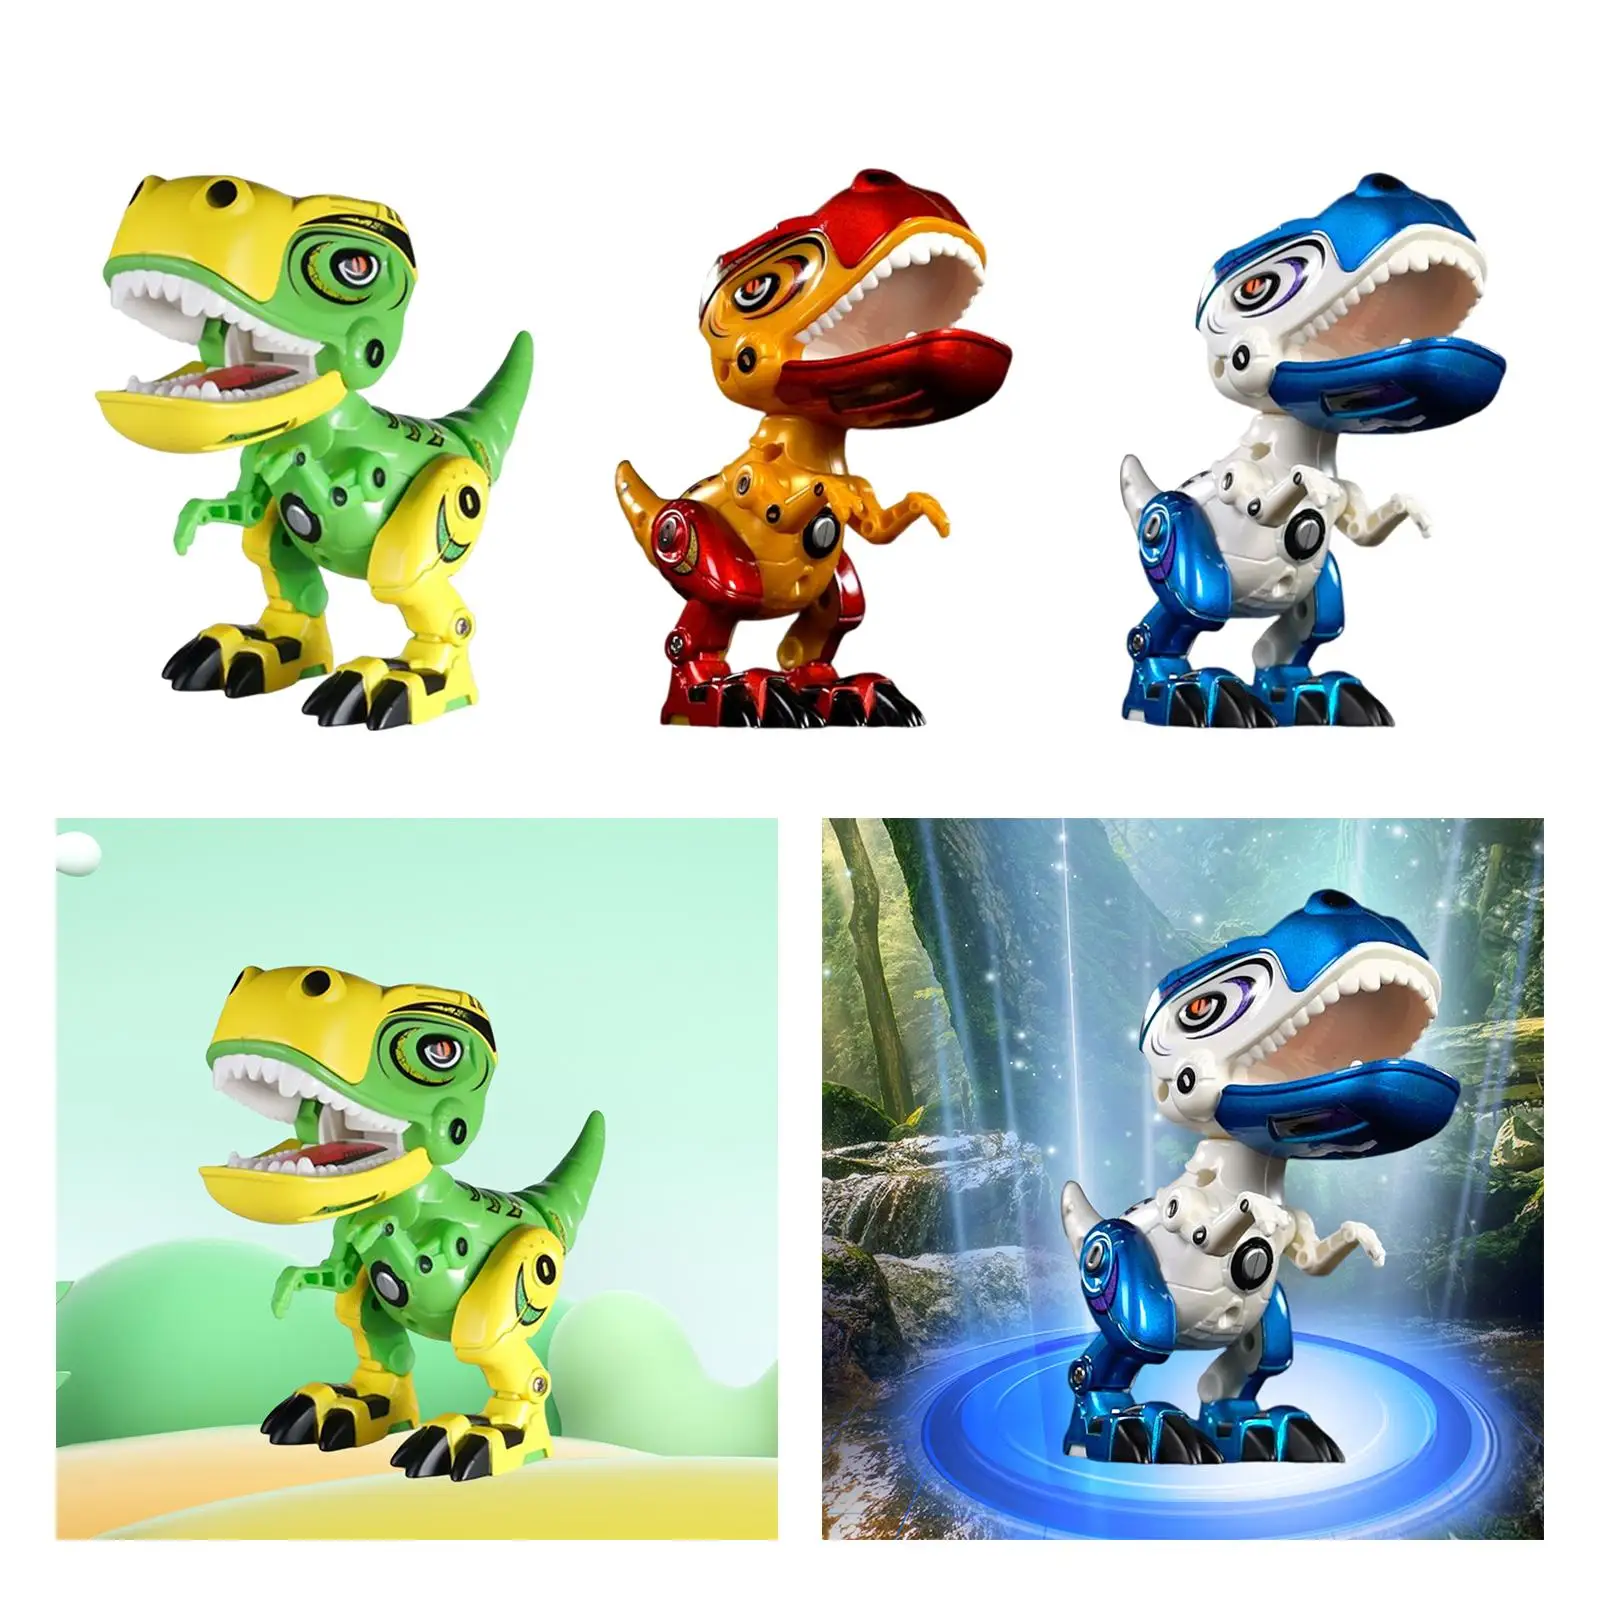 Realistic Electric Dinosaur Toy Early Learning Education Toy Dinosaur Action Toy Figures with Sound and Light for Children Gifts